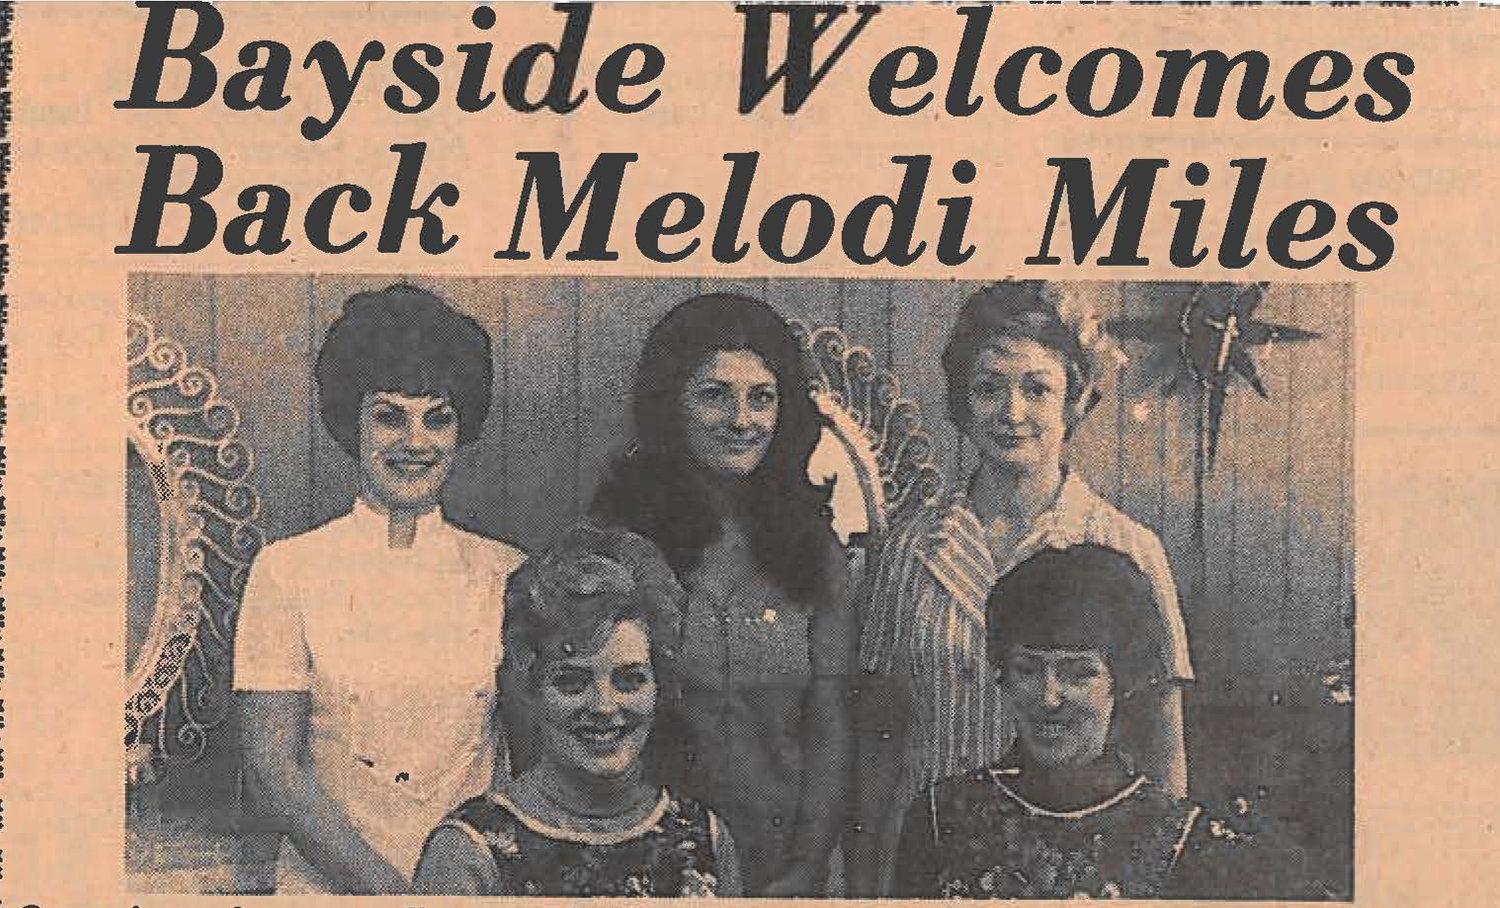 An old article showcases some of the original ‘Bayside Gals’ standing in Bayside Beauty Salon: From l.; hairdresser Inger Middlekauff, Melodi Miles and Vikki Soffoniason. Seated from l.; owner Judy Dunster and hairdresser Doreen Haugen.